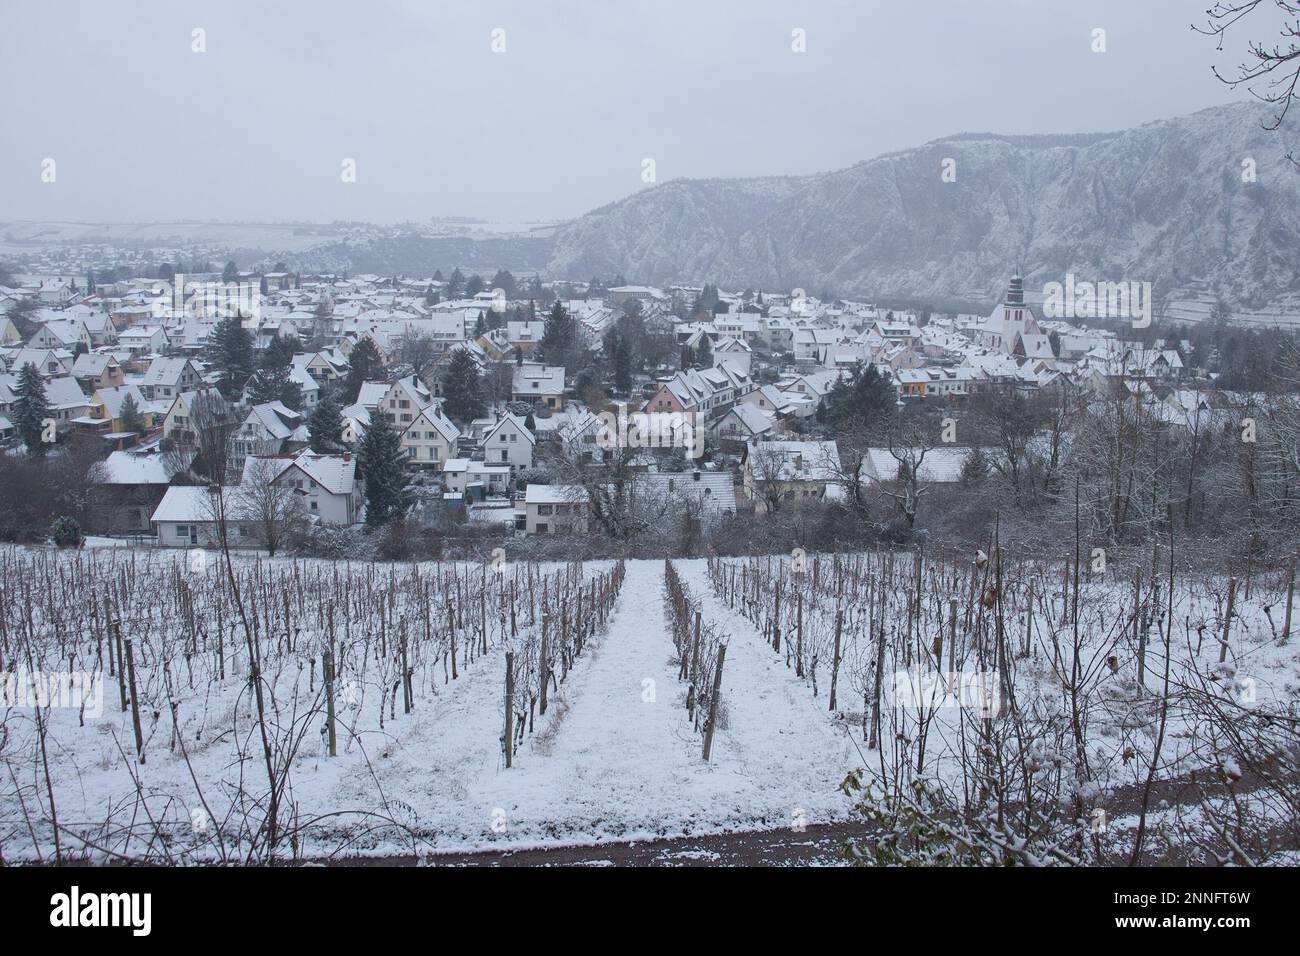 Bad Munster am Stein-Ebernburg, Germany - Febryary 8, 2021: Overlooking vineyard, Bad Munster and Rotenfels covered in snow on a cold, grey, foggy win Stock Photo